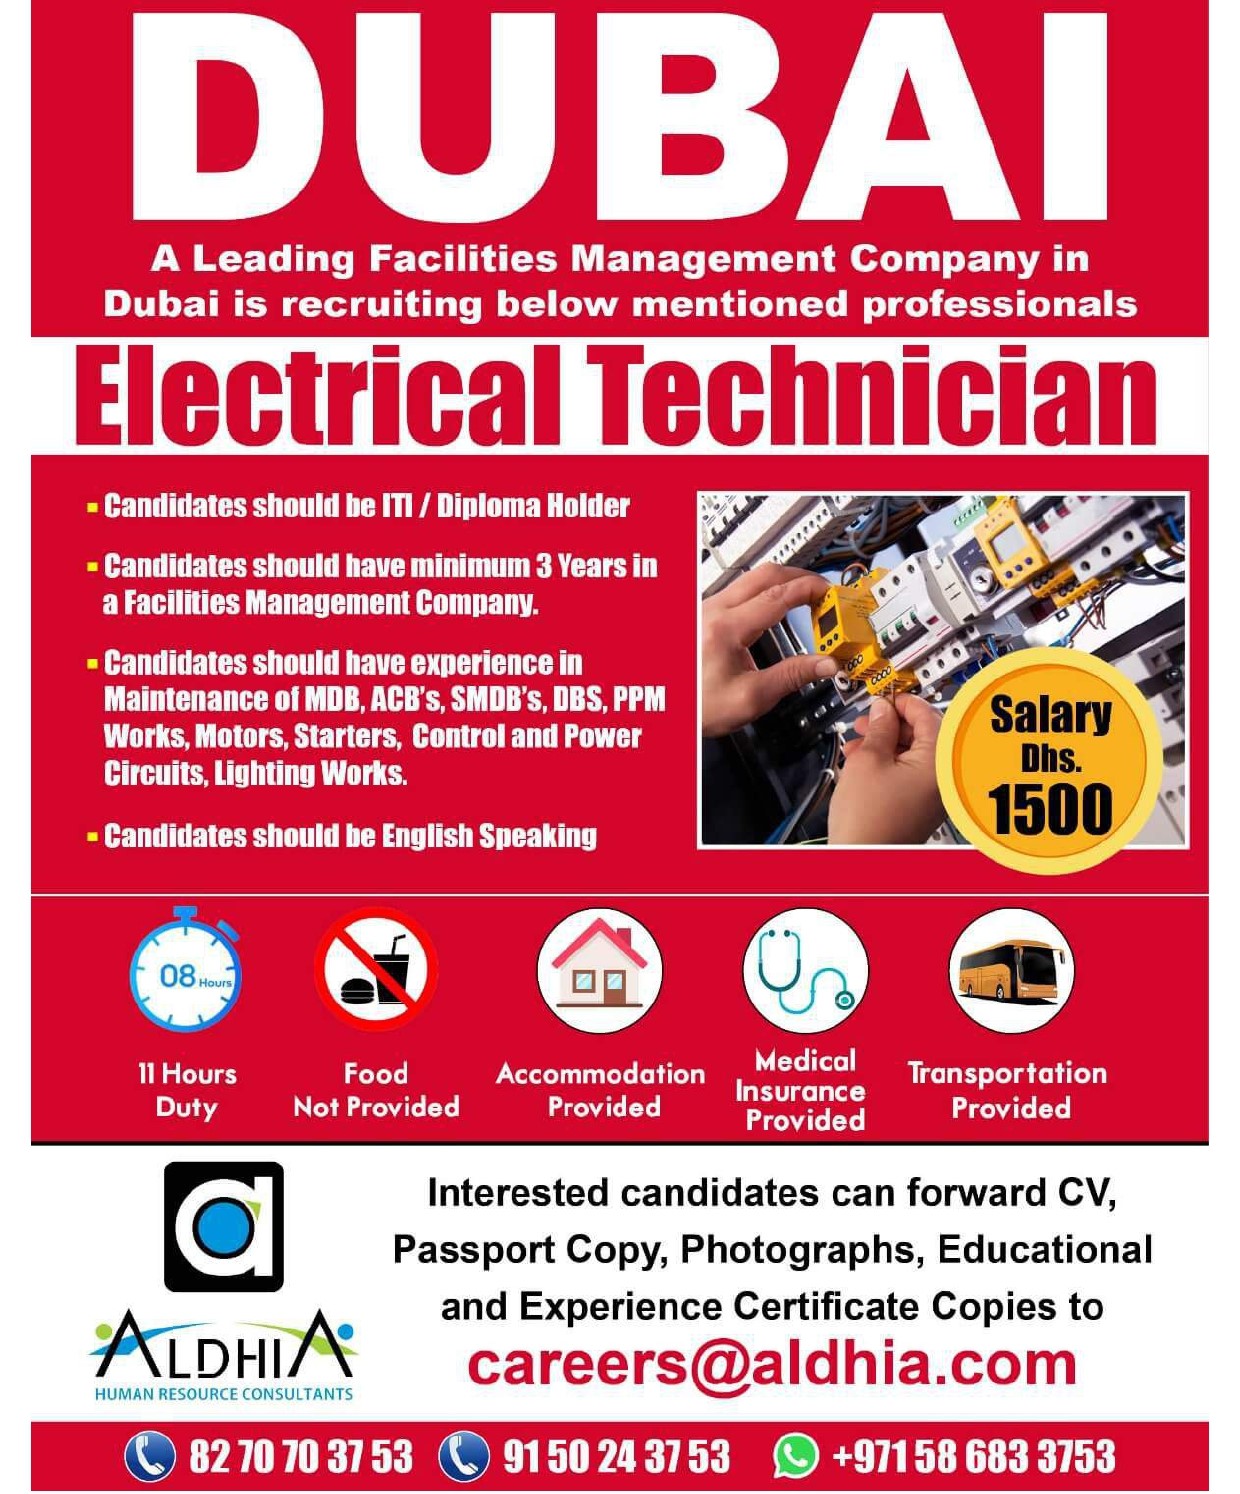 Required Electrical Technician for UAE